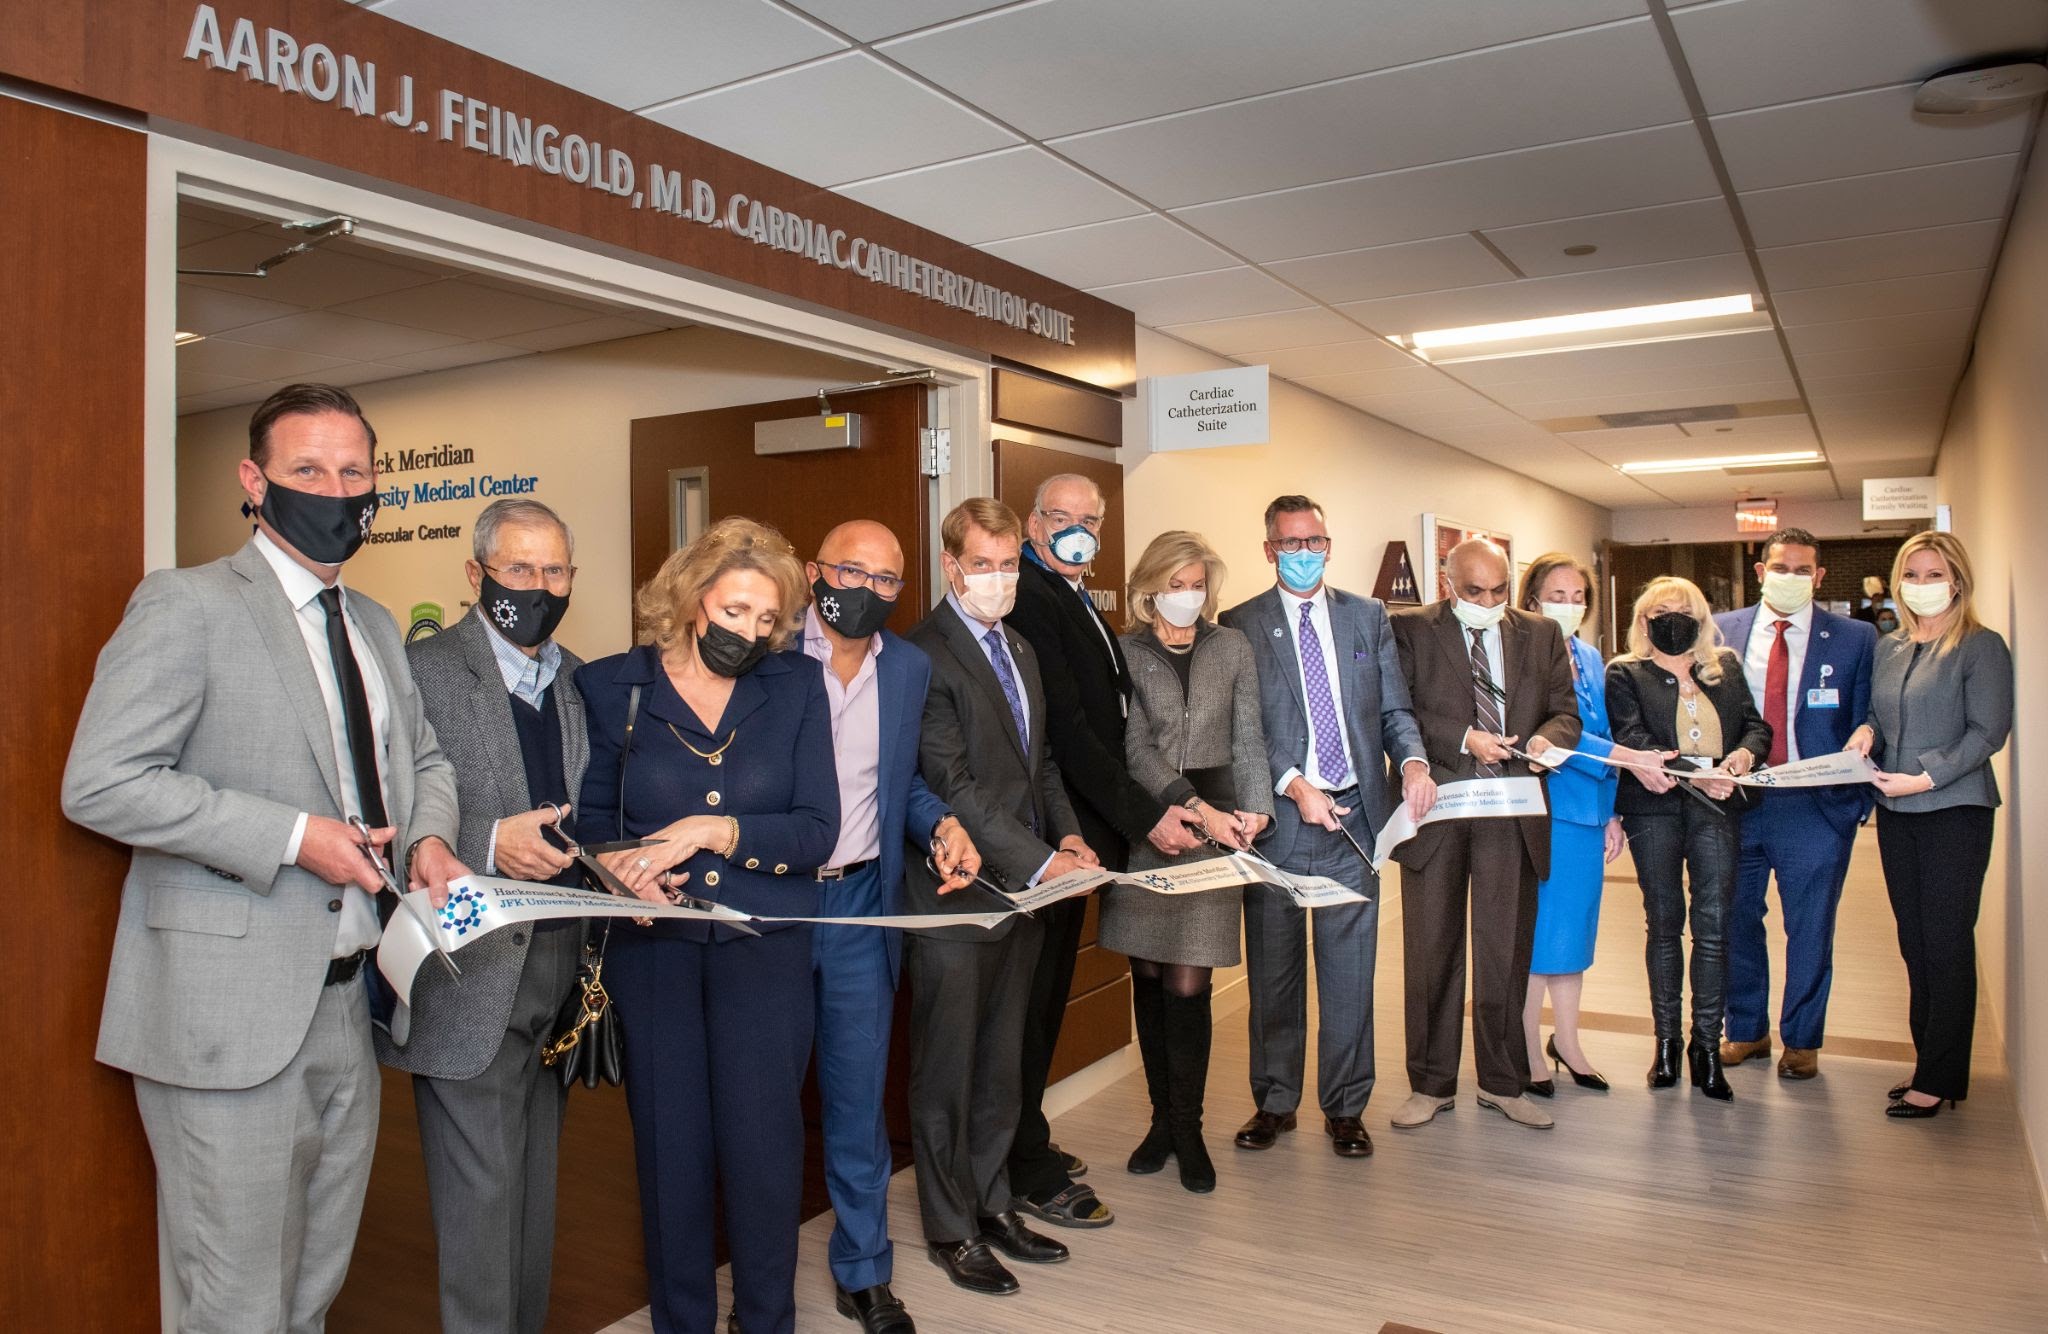 JFK University Medical Center Foundation Celebrates Generous Gift from Grateful Patient and Ribbon-Cutting of Aaron J. Feingold, M.D. Cardiac Catheterization Suite